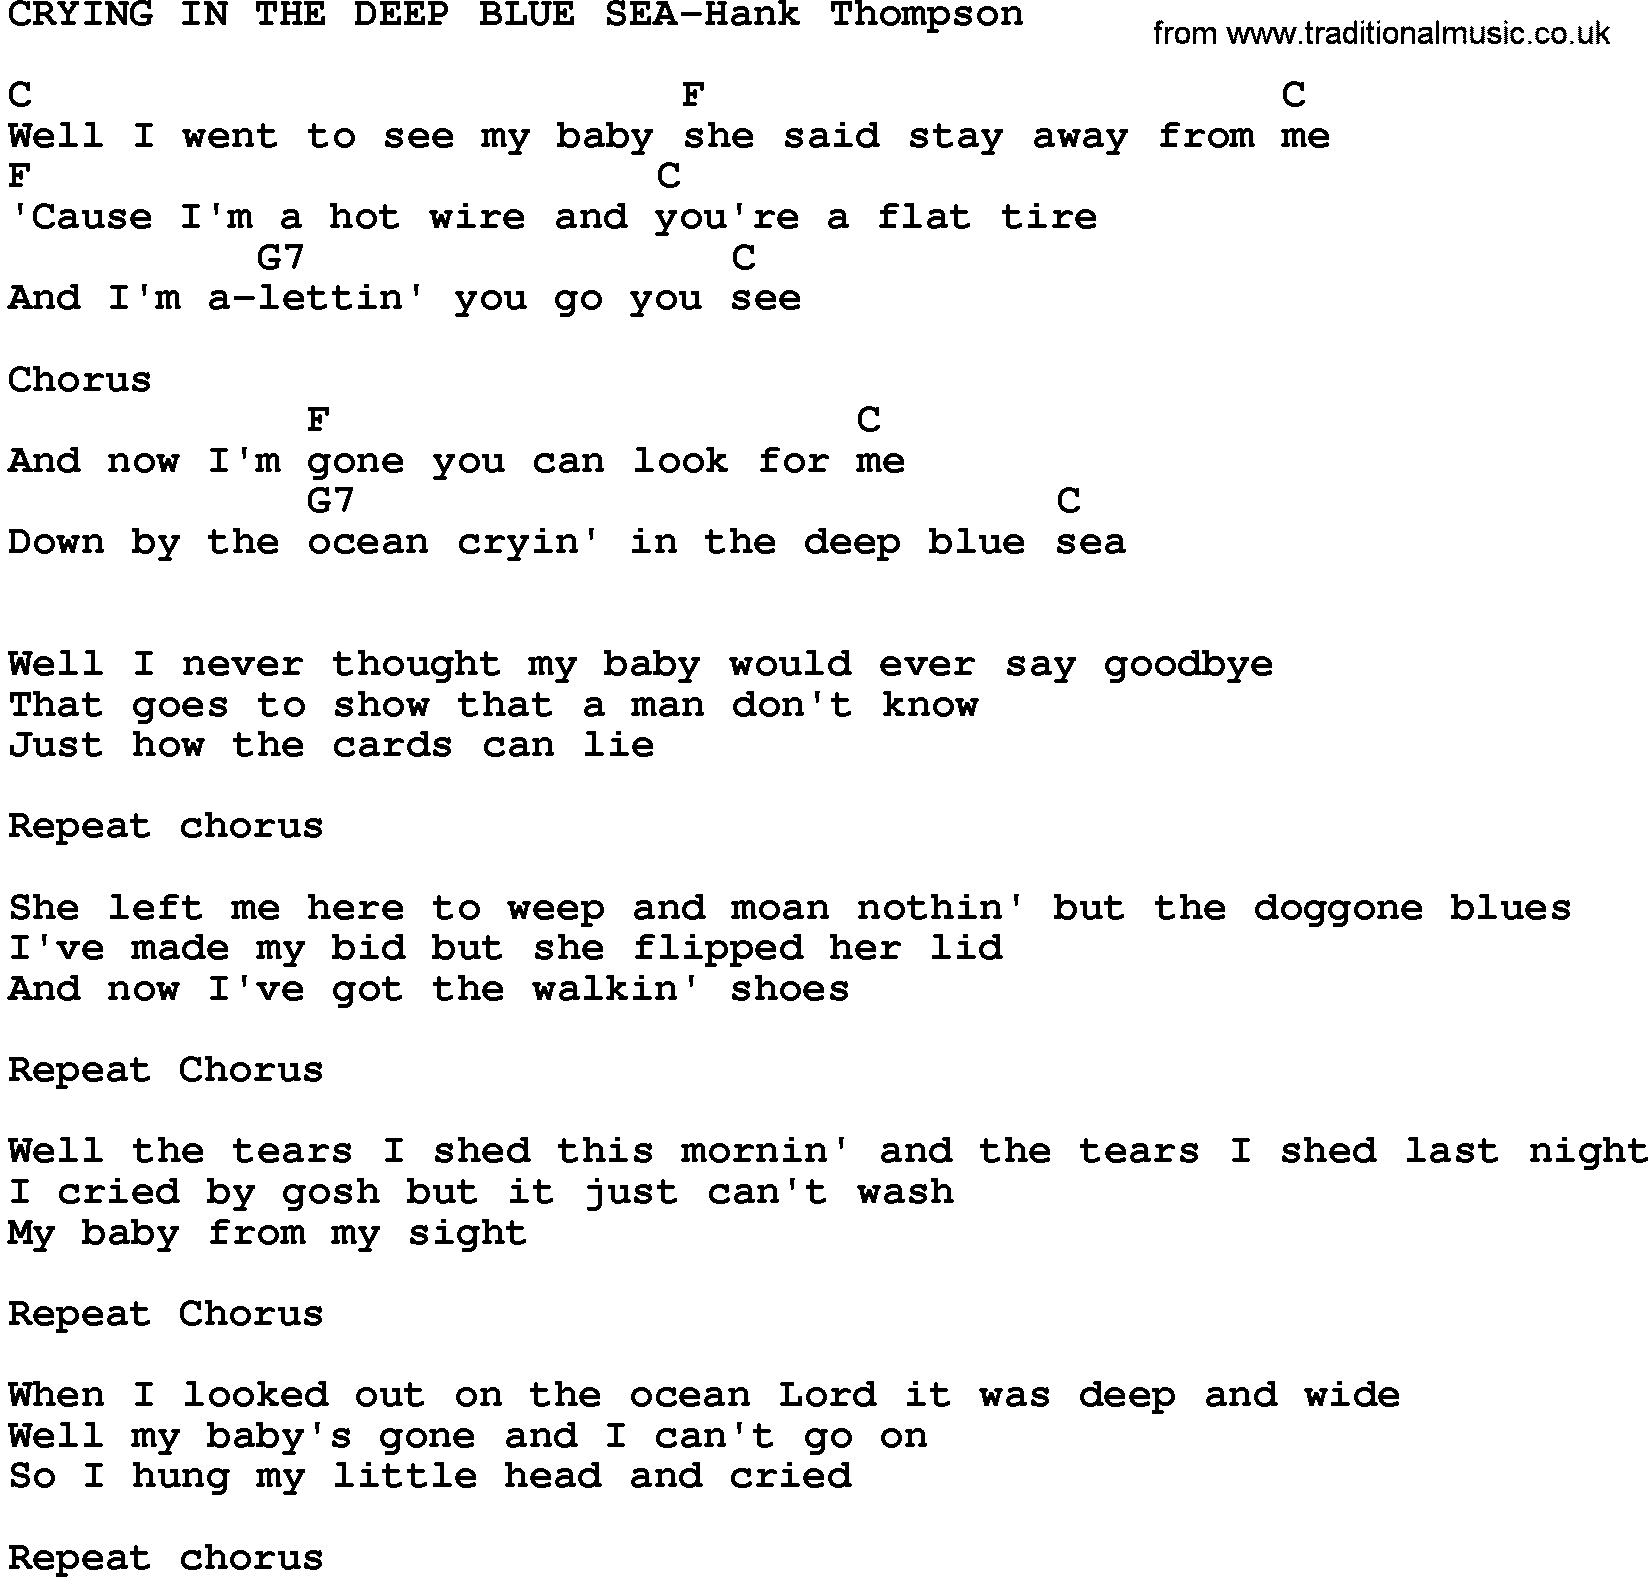 Country music song: Crying In The Deep Blue Sea-Hank Thompson lyrics and chords